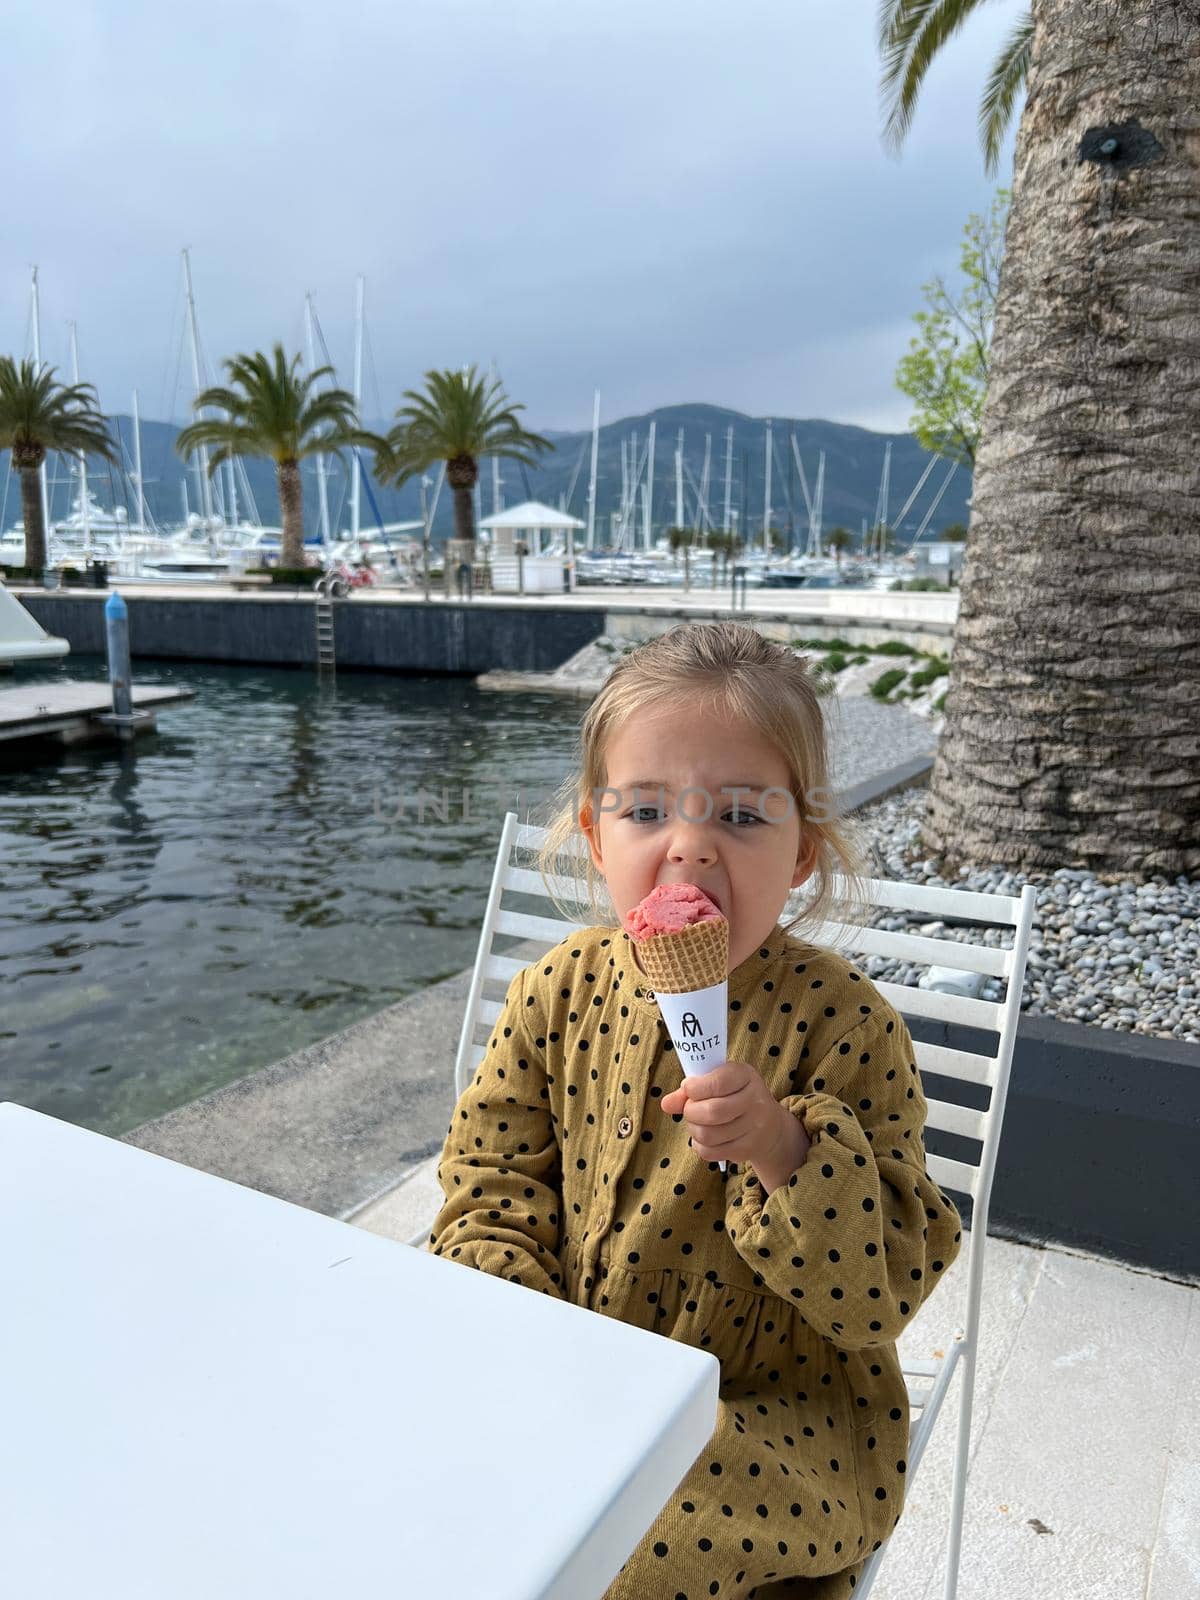 Little girl eats an ice cream cone on the embankment. High quality photo